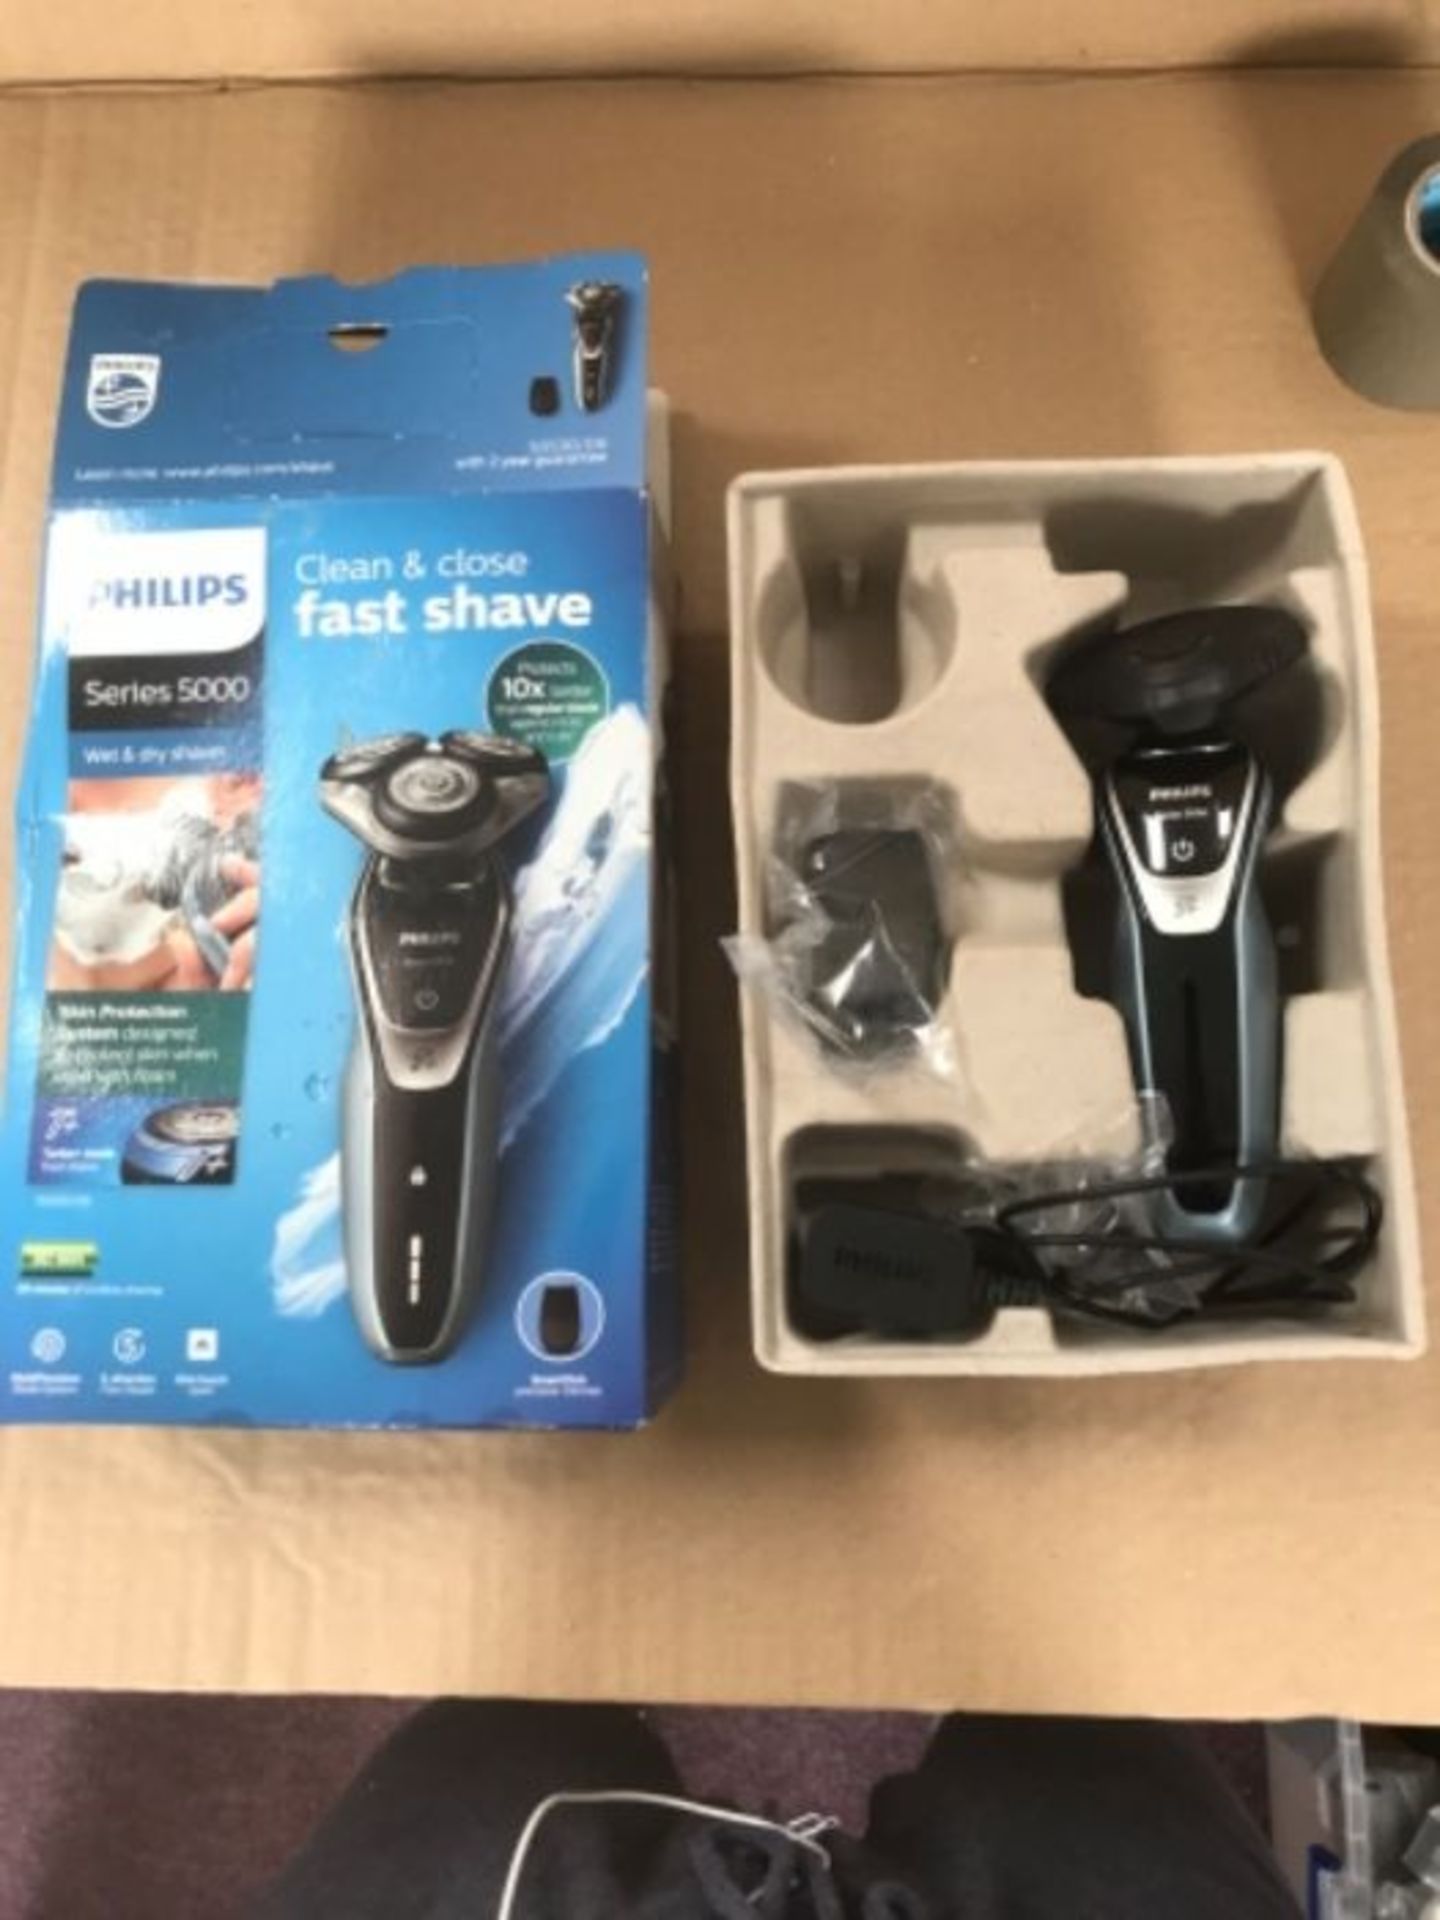 RRP £74.00 Philips Series 5000 Wet and Dry Men's Electric Shaver with Turbo Plus Mode - S5530/06 - Image 2 of 2